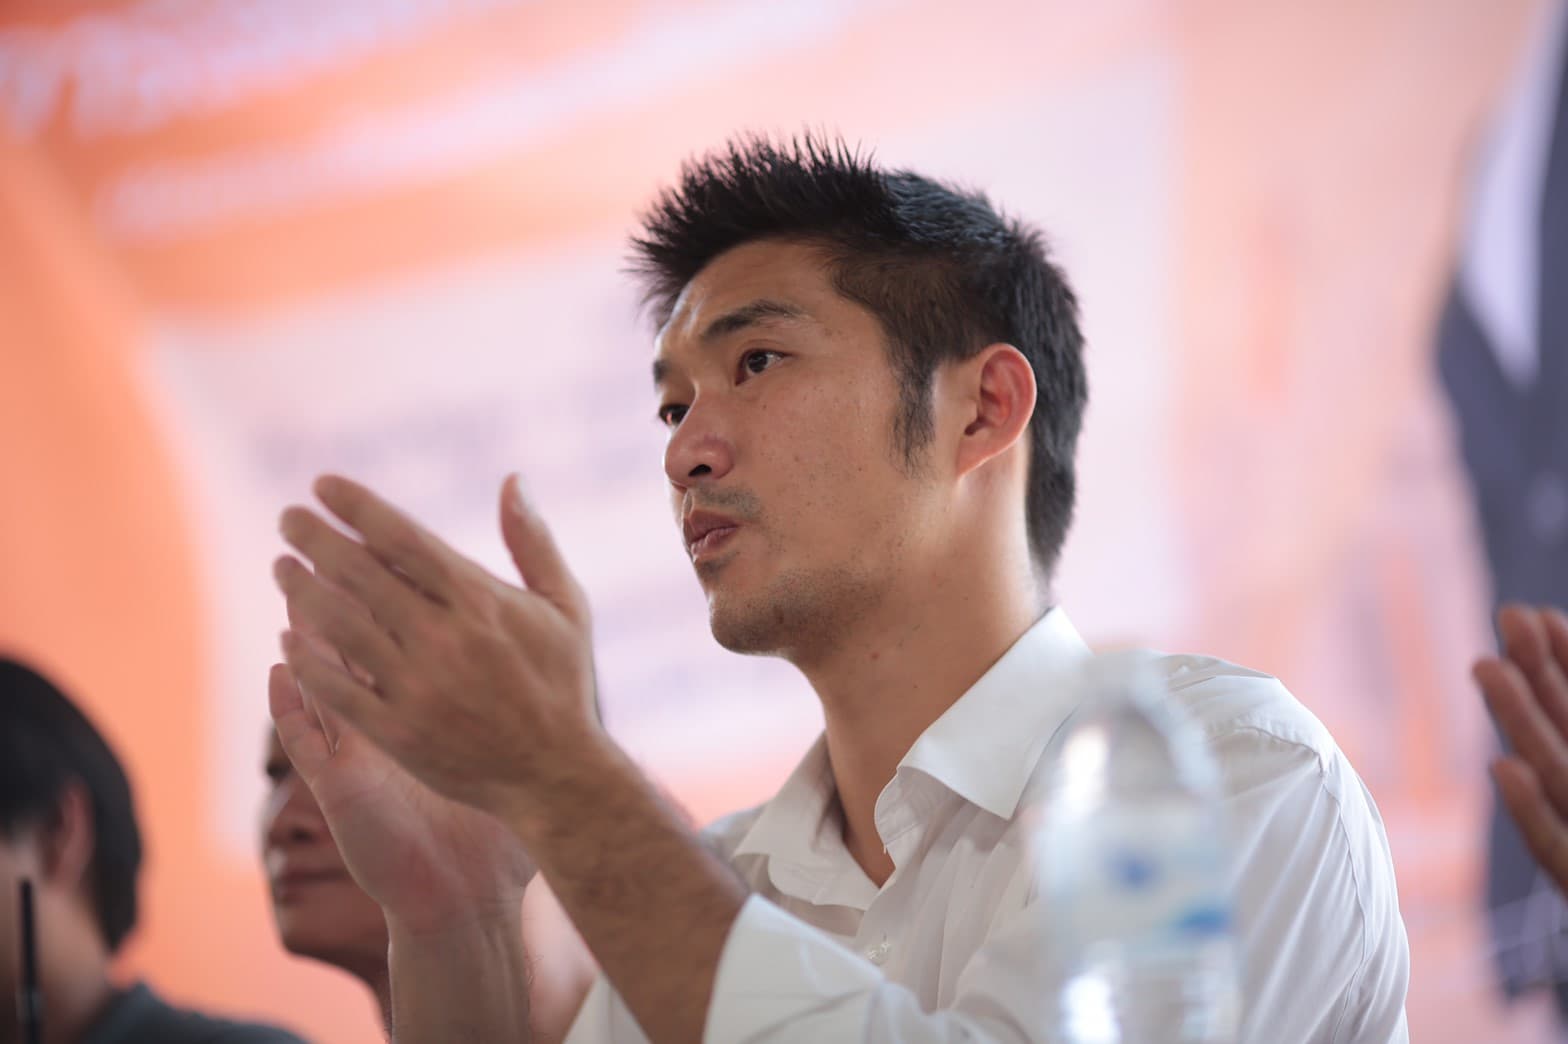 Thanathorn Juangroongruangkit, founder of the Future Forward party (photo credit: Prachatai/flickr)